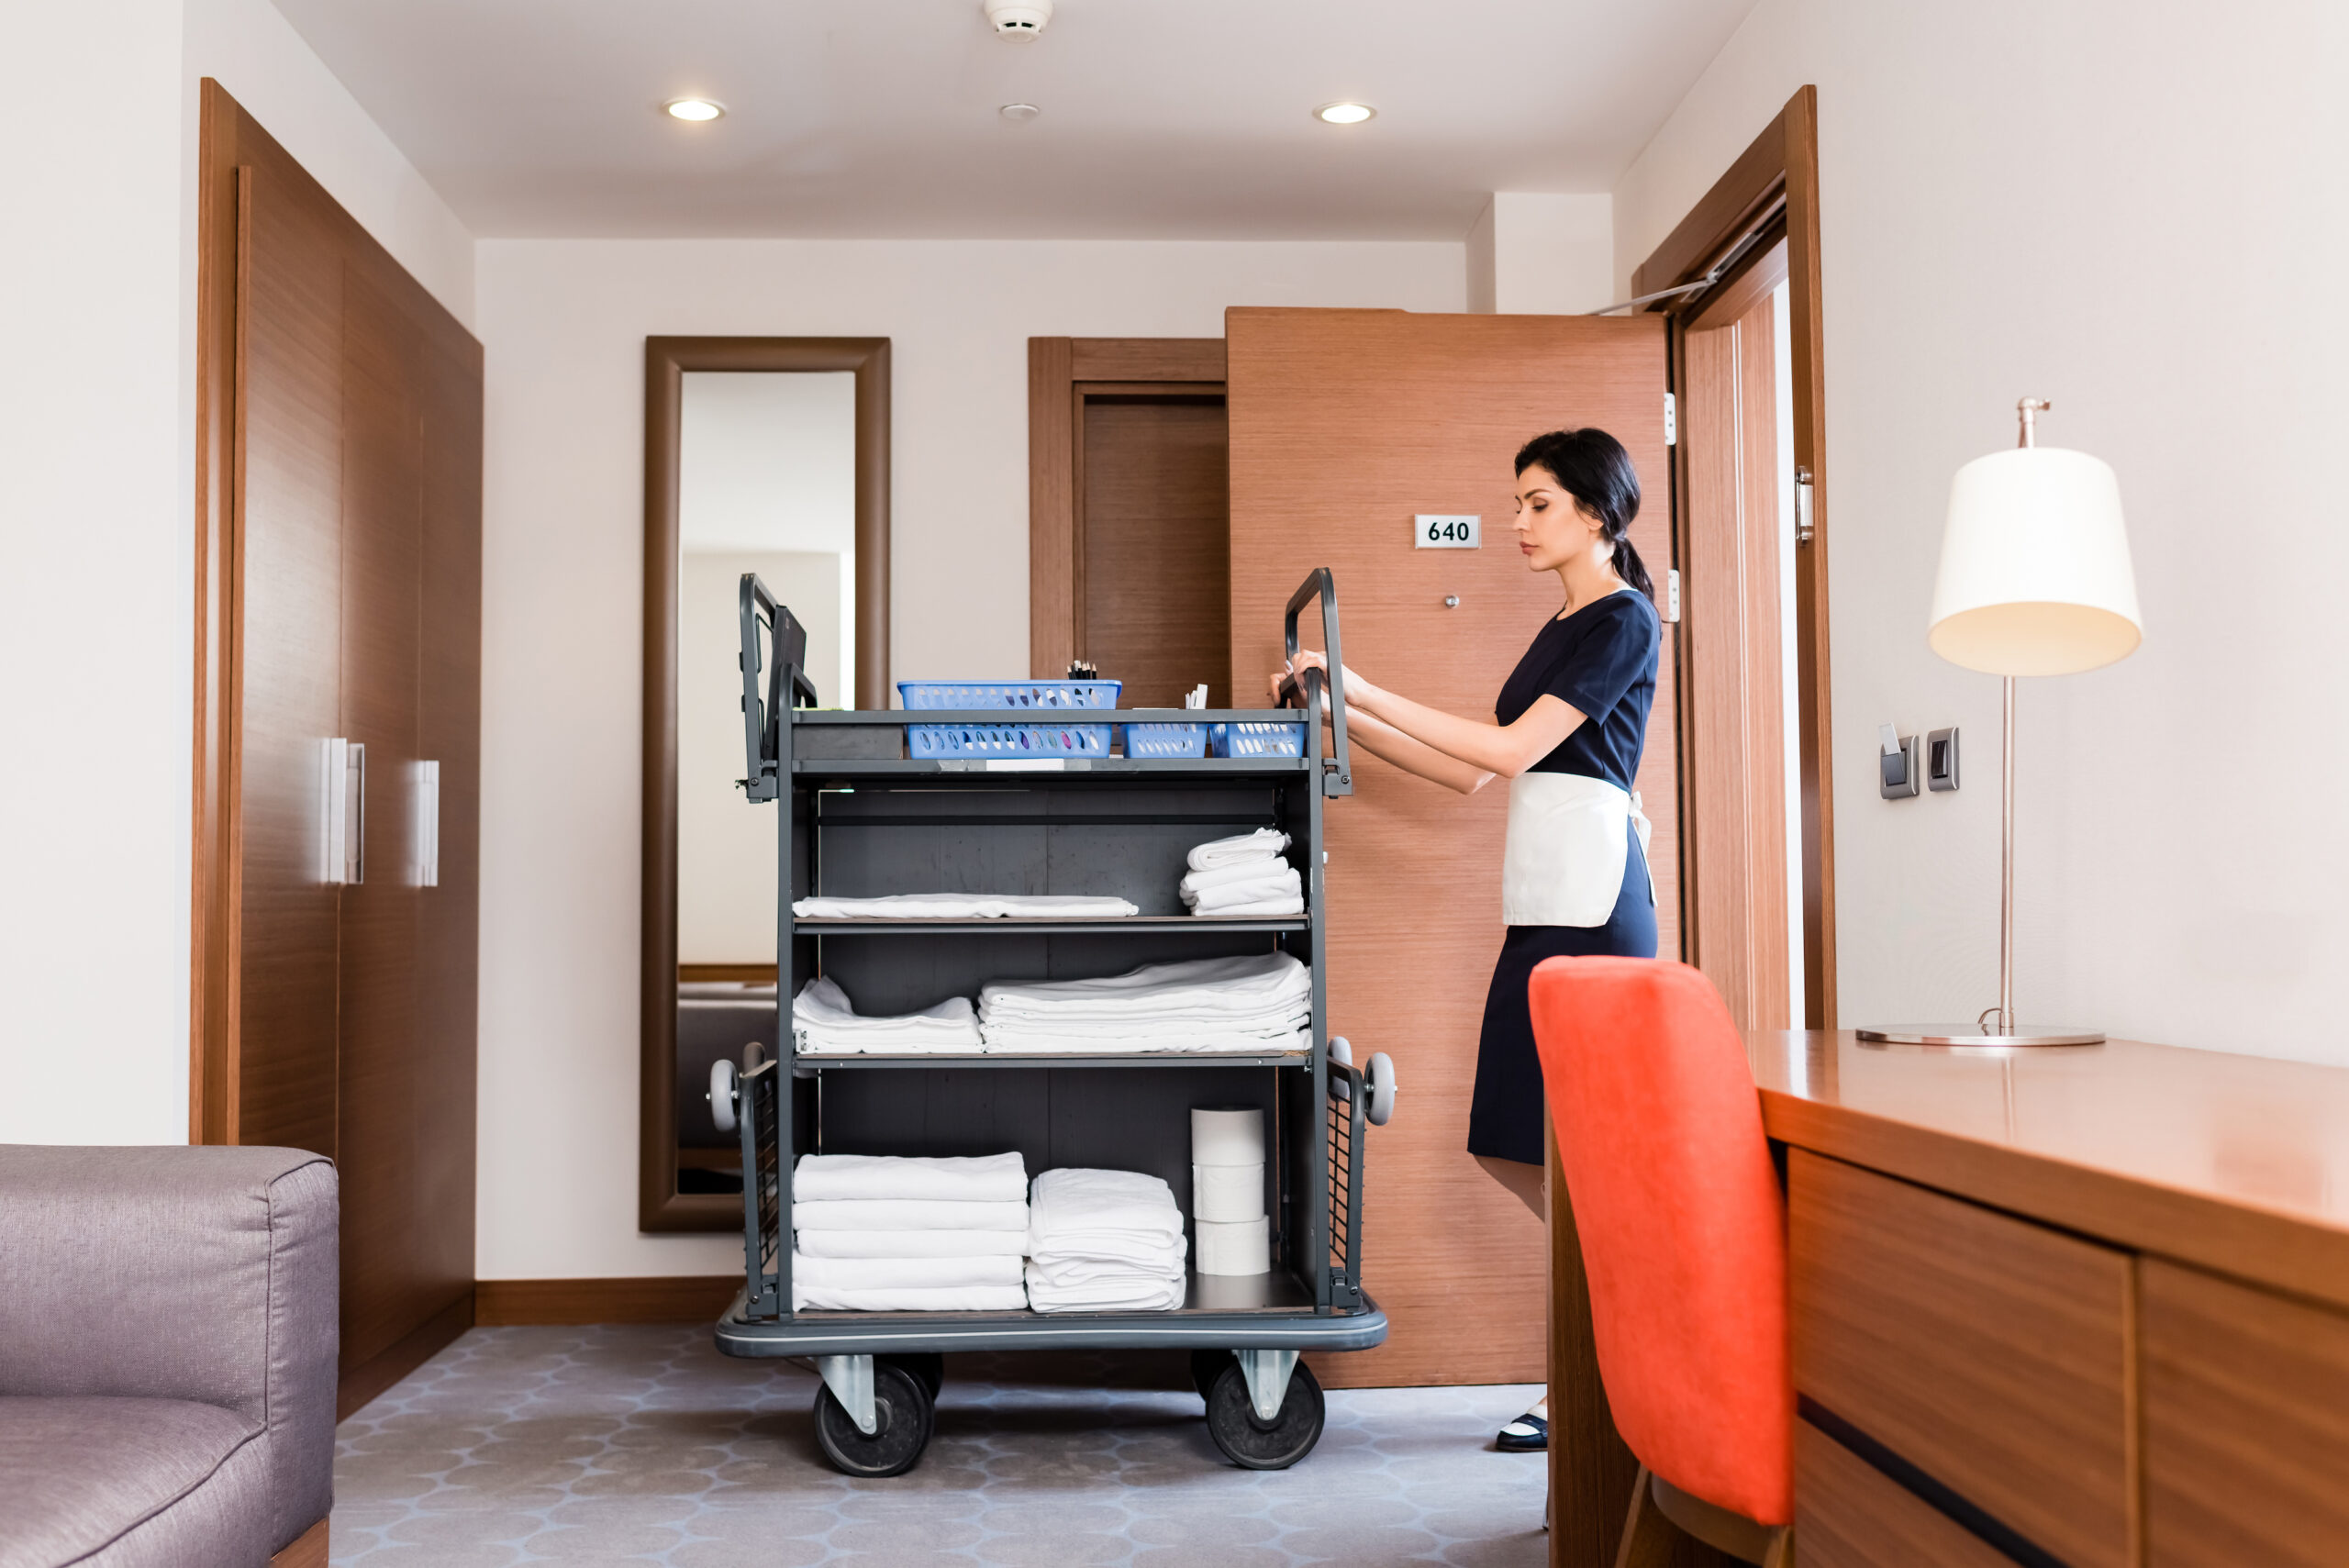 Hotels can highly benefit from a smart inventory management system. | IntelTagRFID